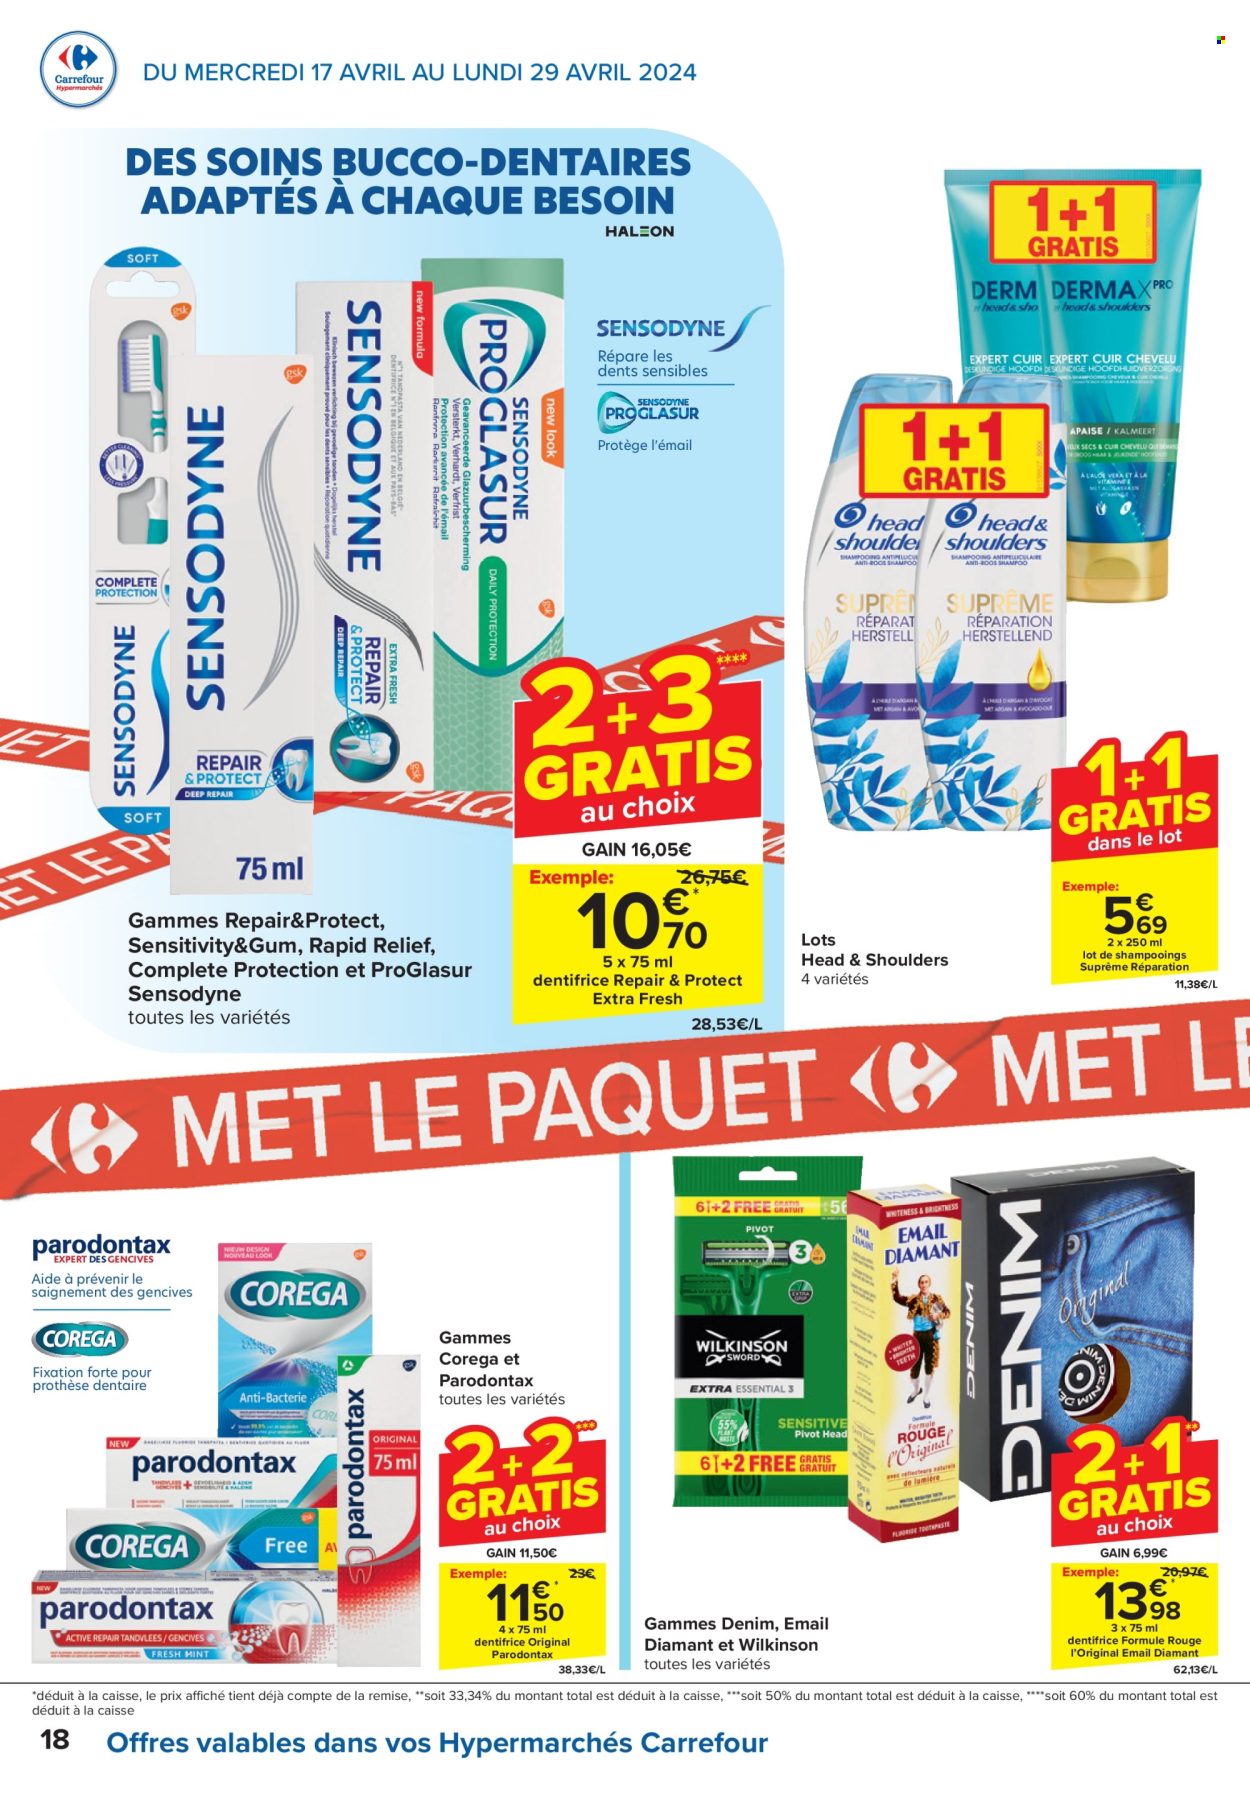 Catalogue Carrefour hypermarkt - 17.4.2024 - 29.4.2024. Page 18.